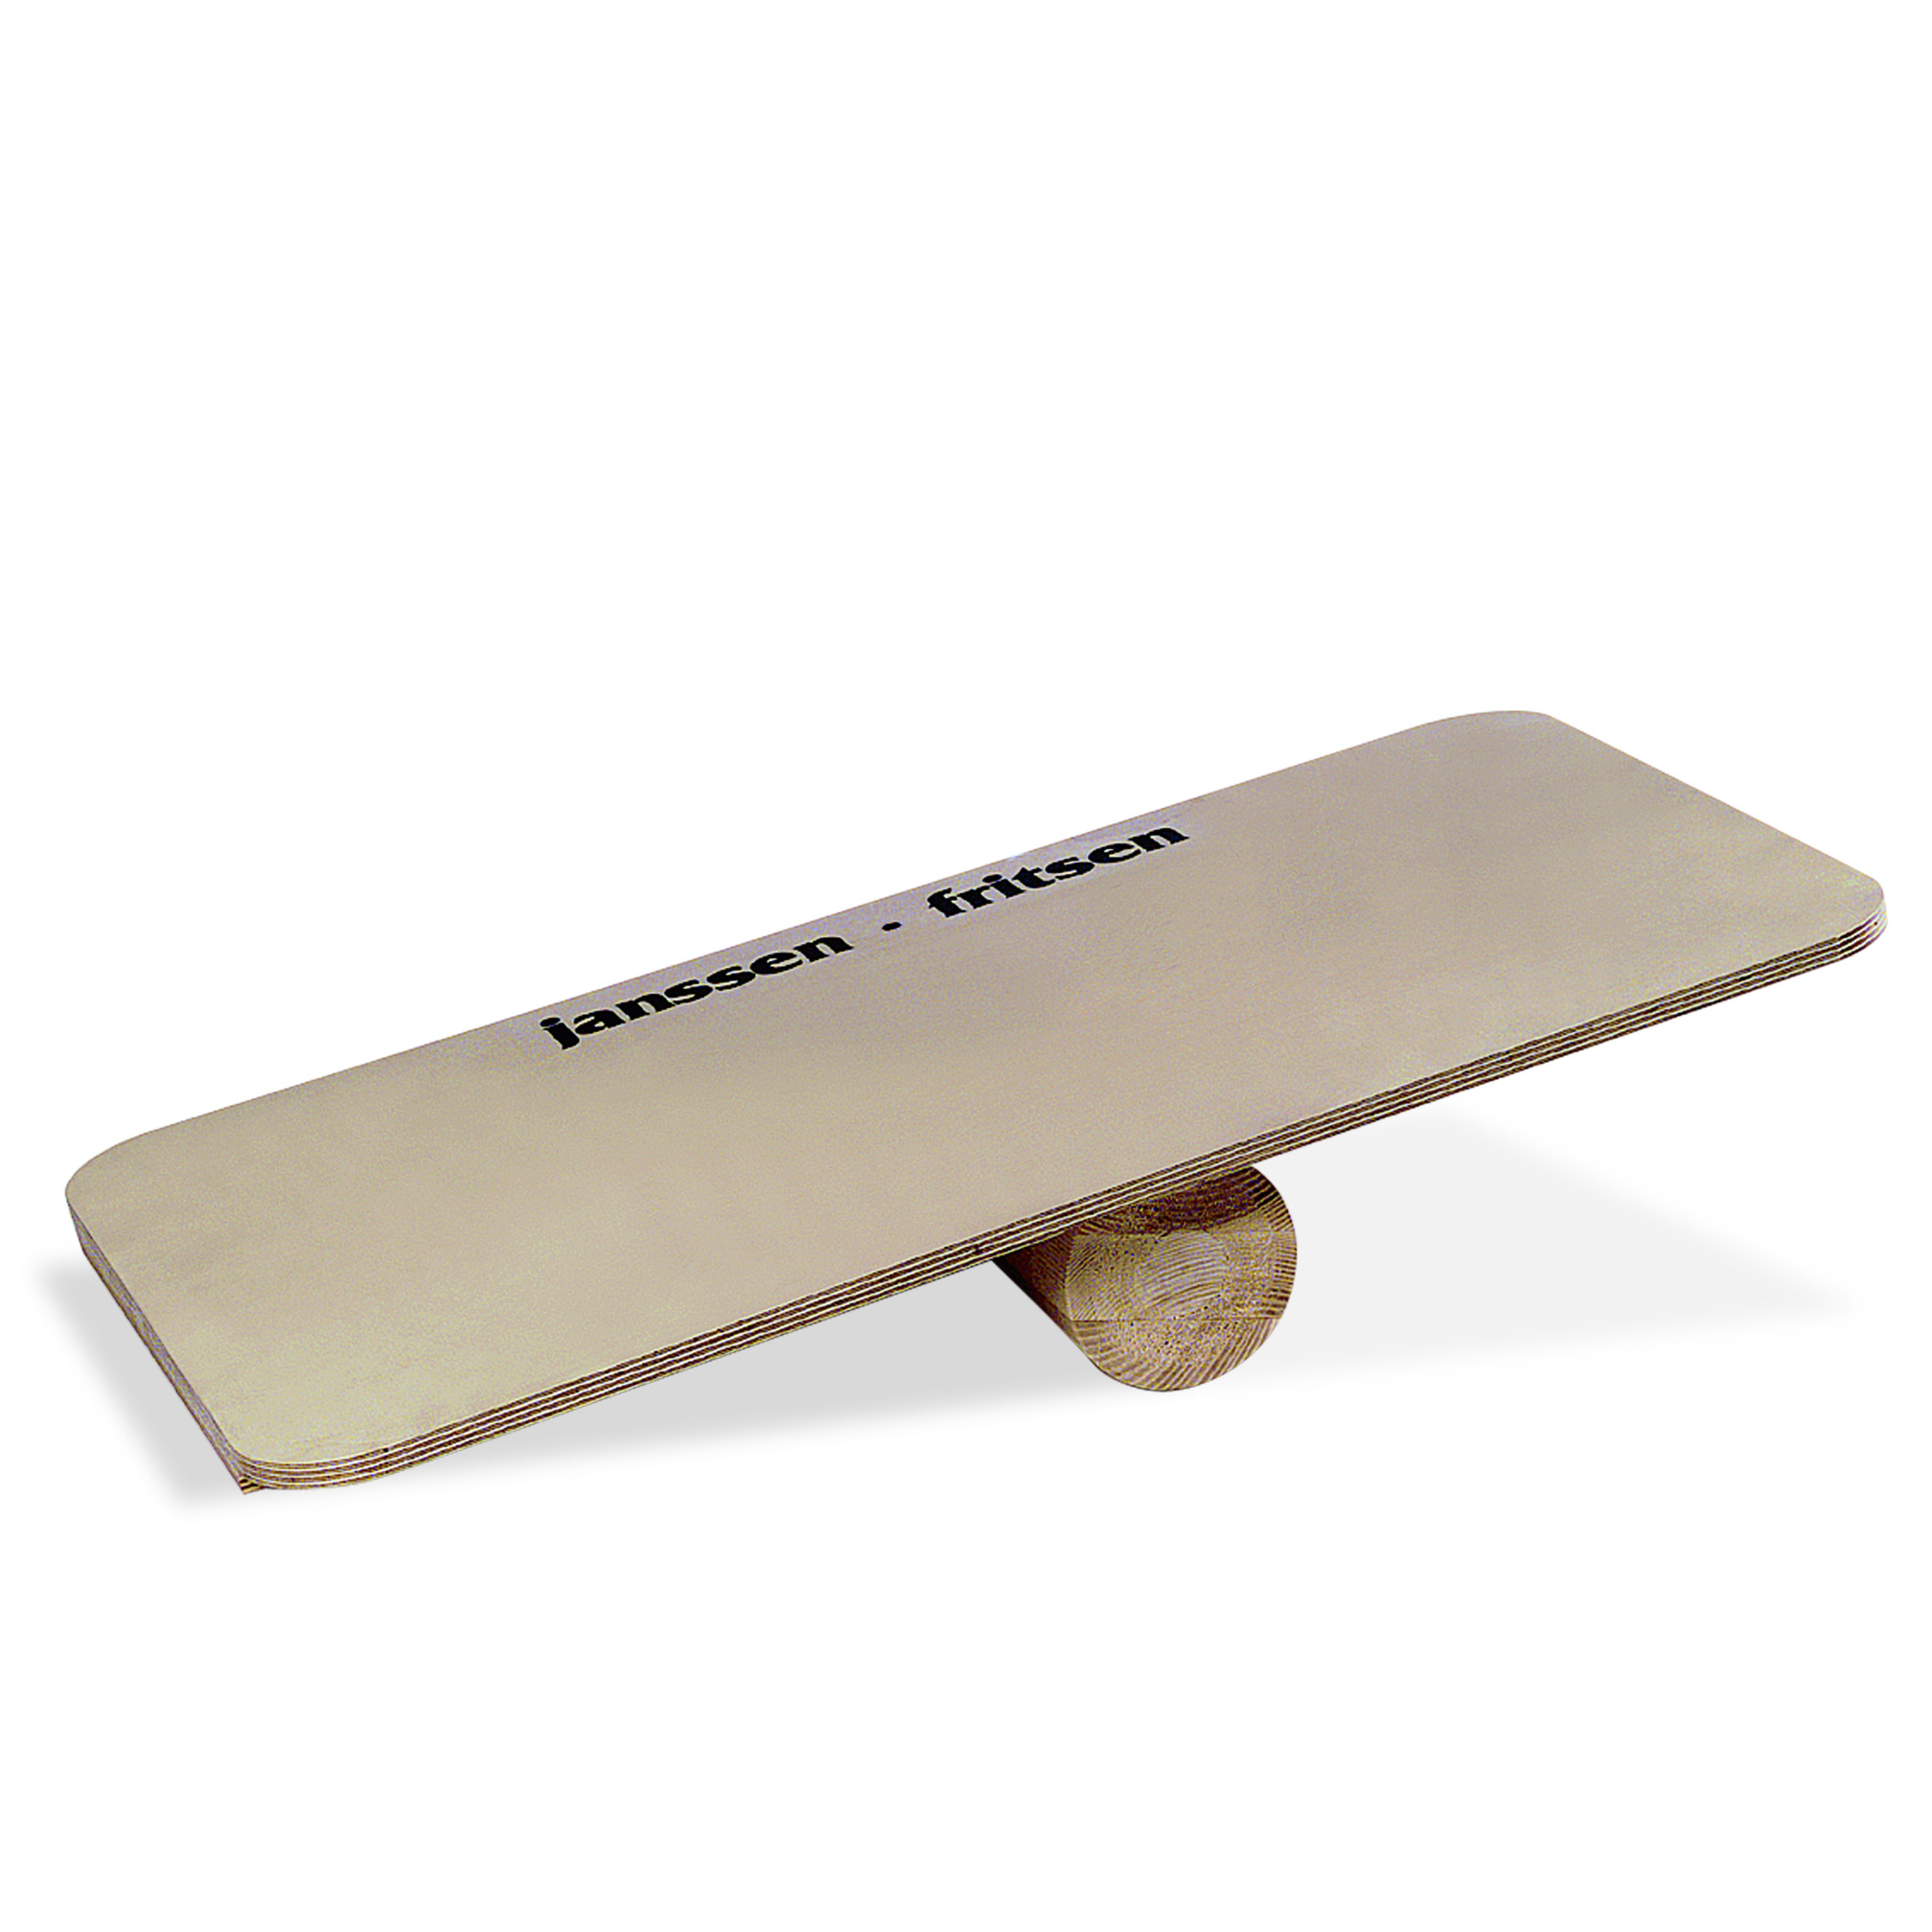 Wooden balancing board with roll